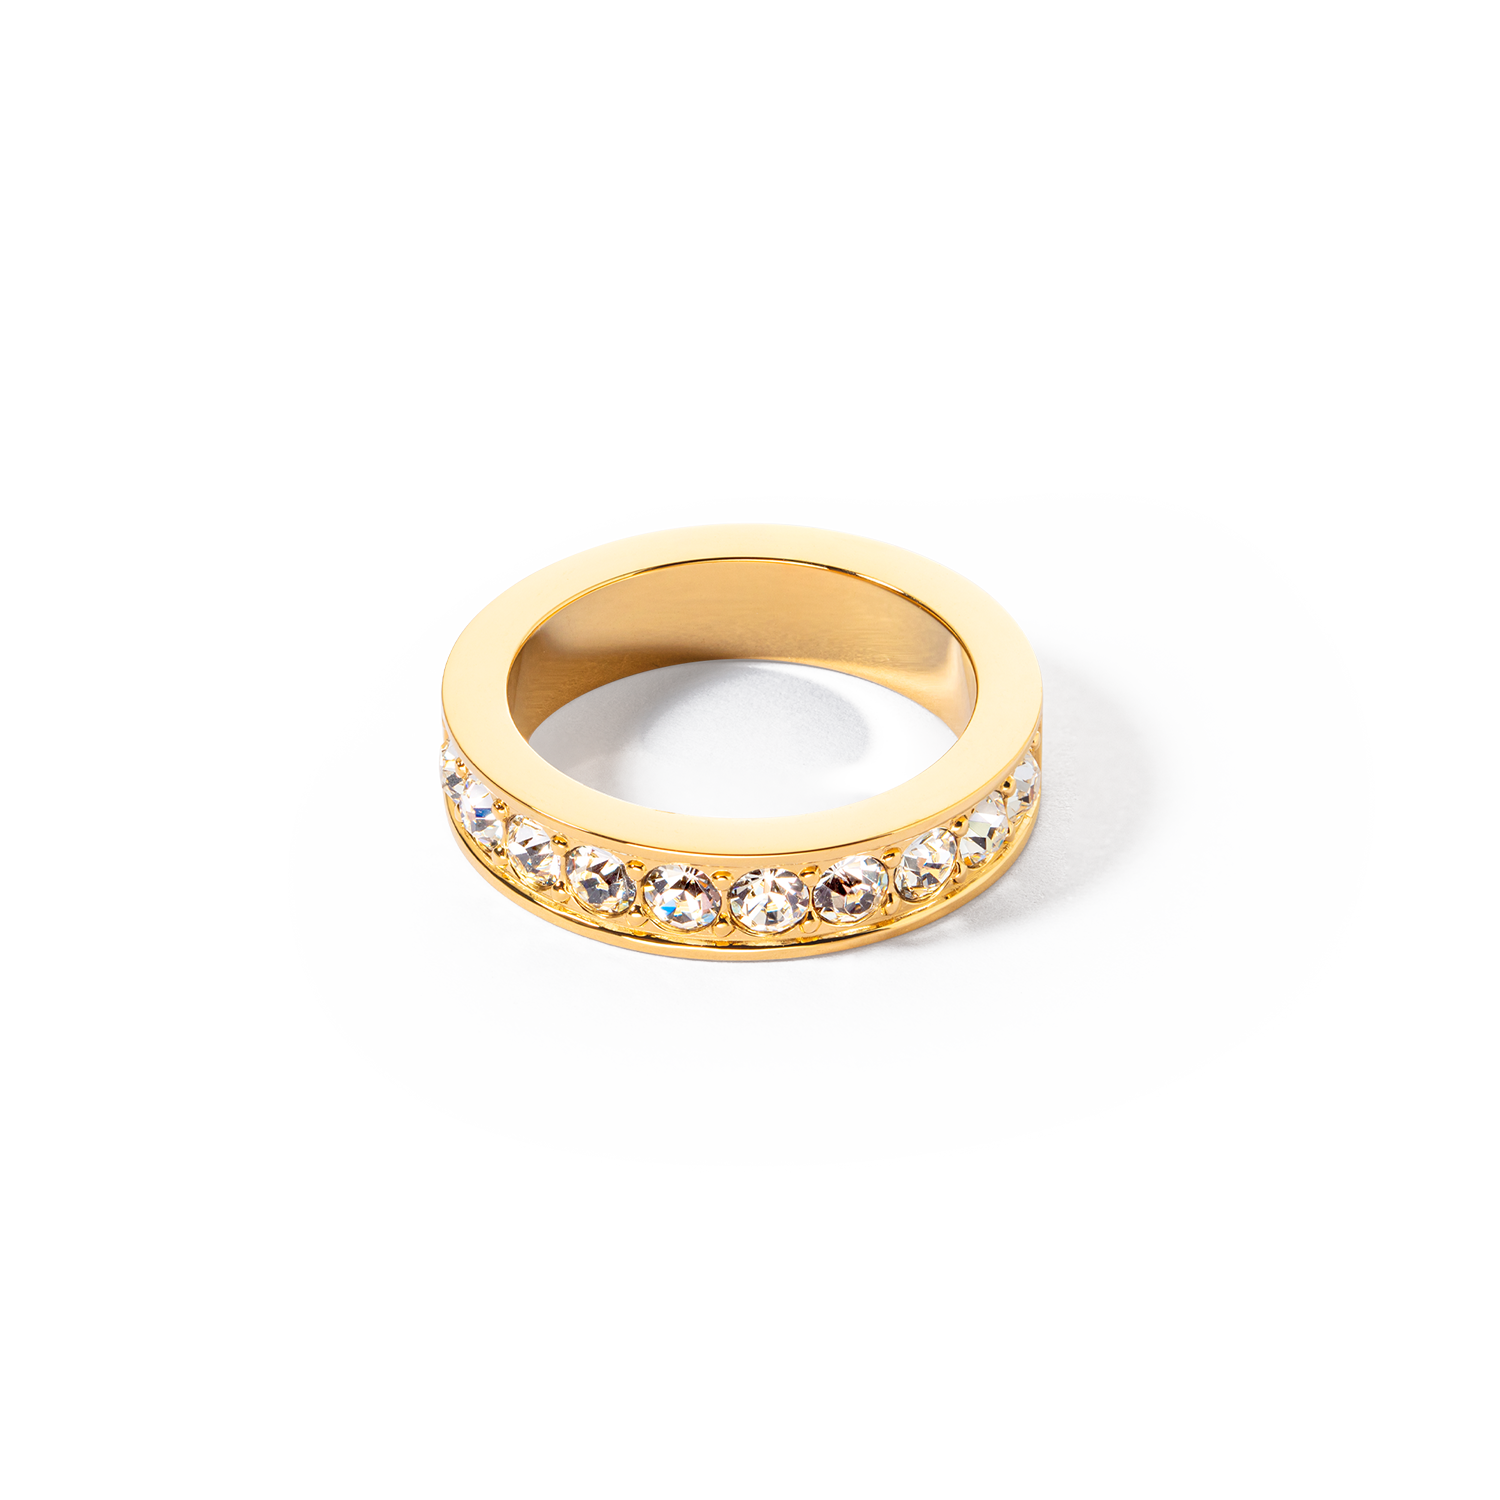 Ring stainless steel & crystals gold crystal